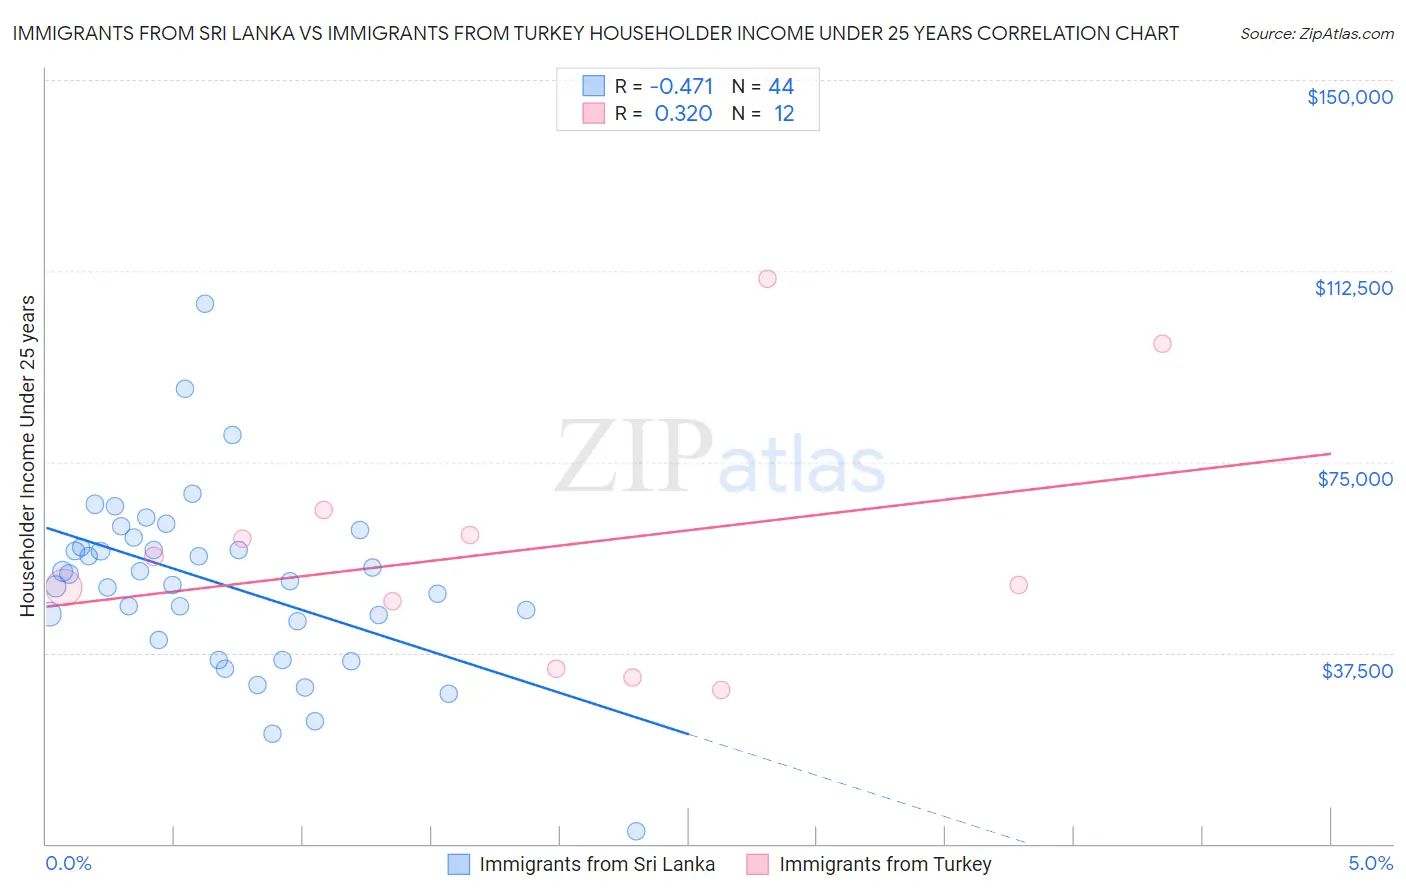 Immigrants from Sri Lanka vs Immigrants from Turkey Householder Income Under 25 years